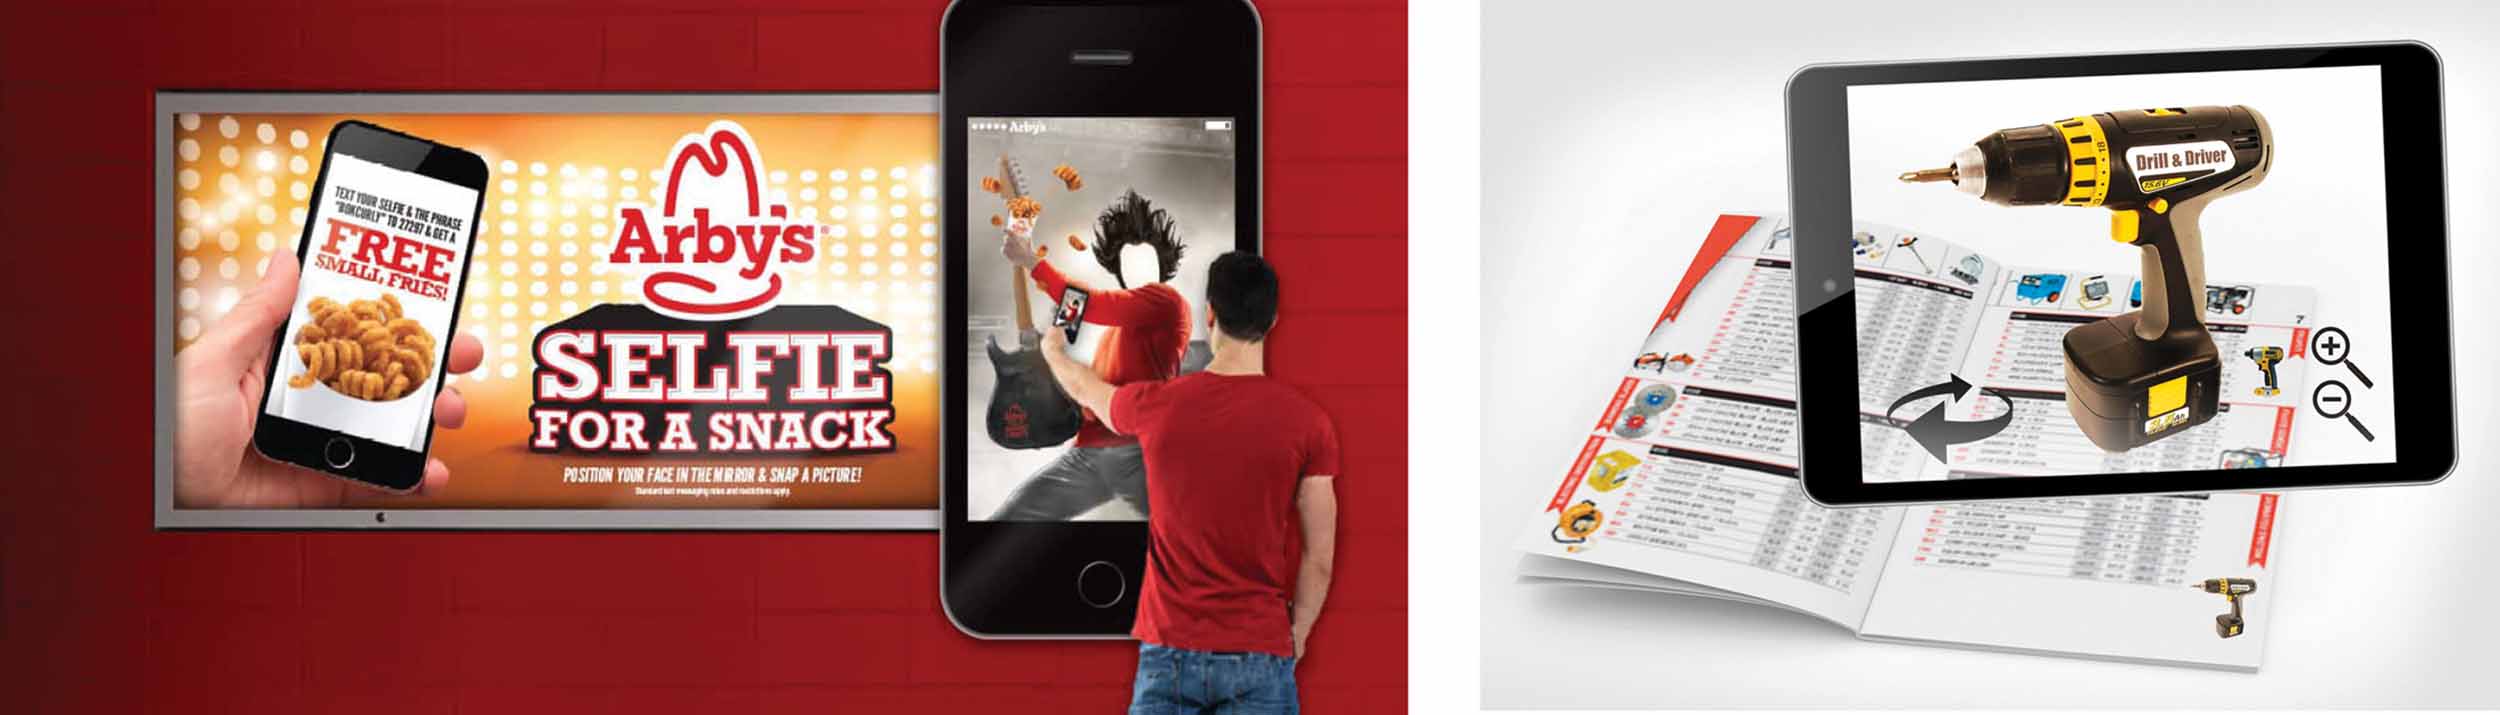 Arbys ad with person scanning ad with mobile phone